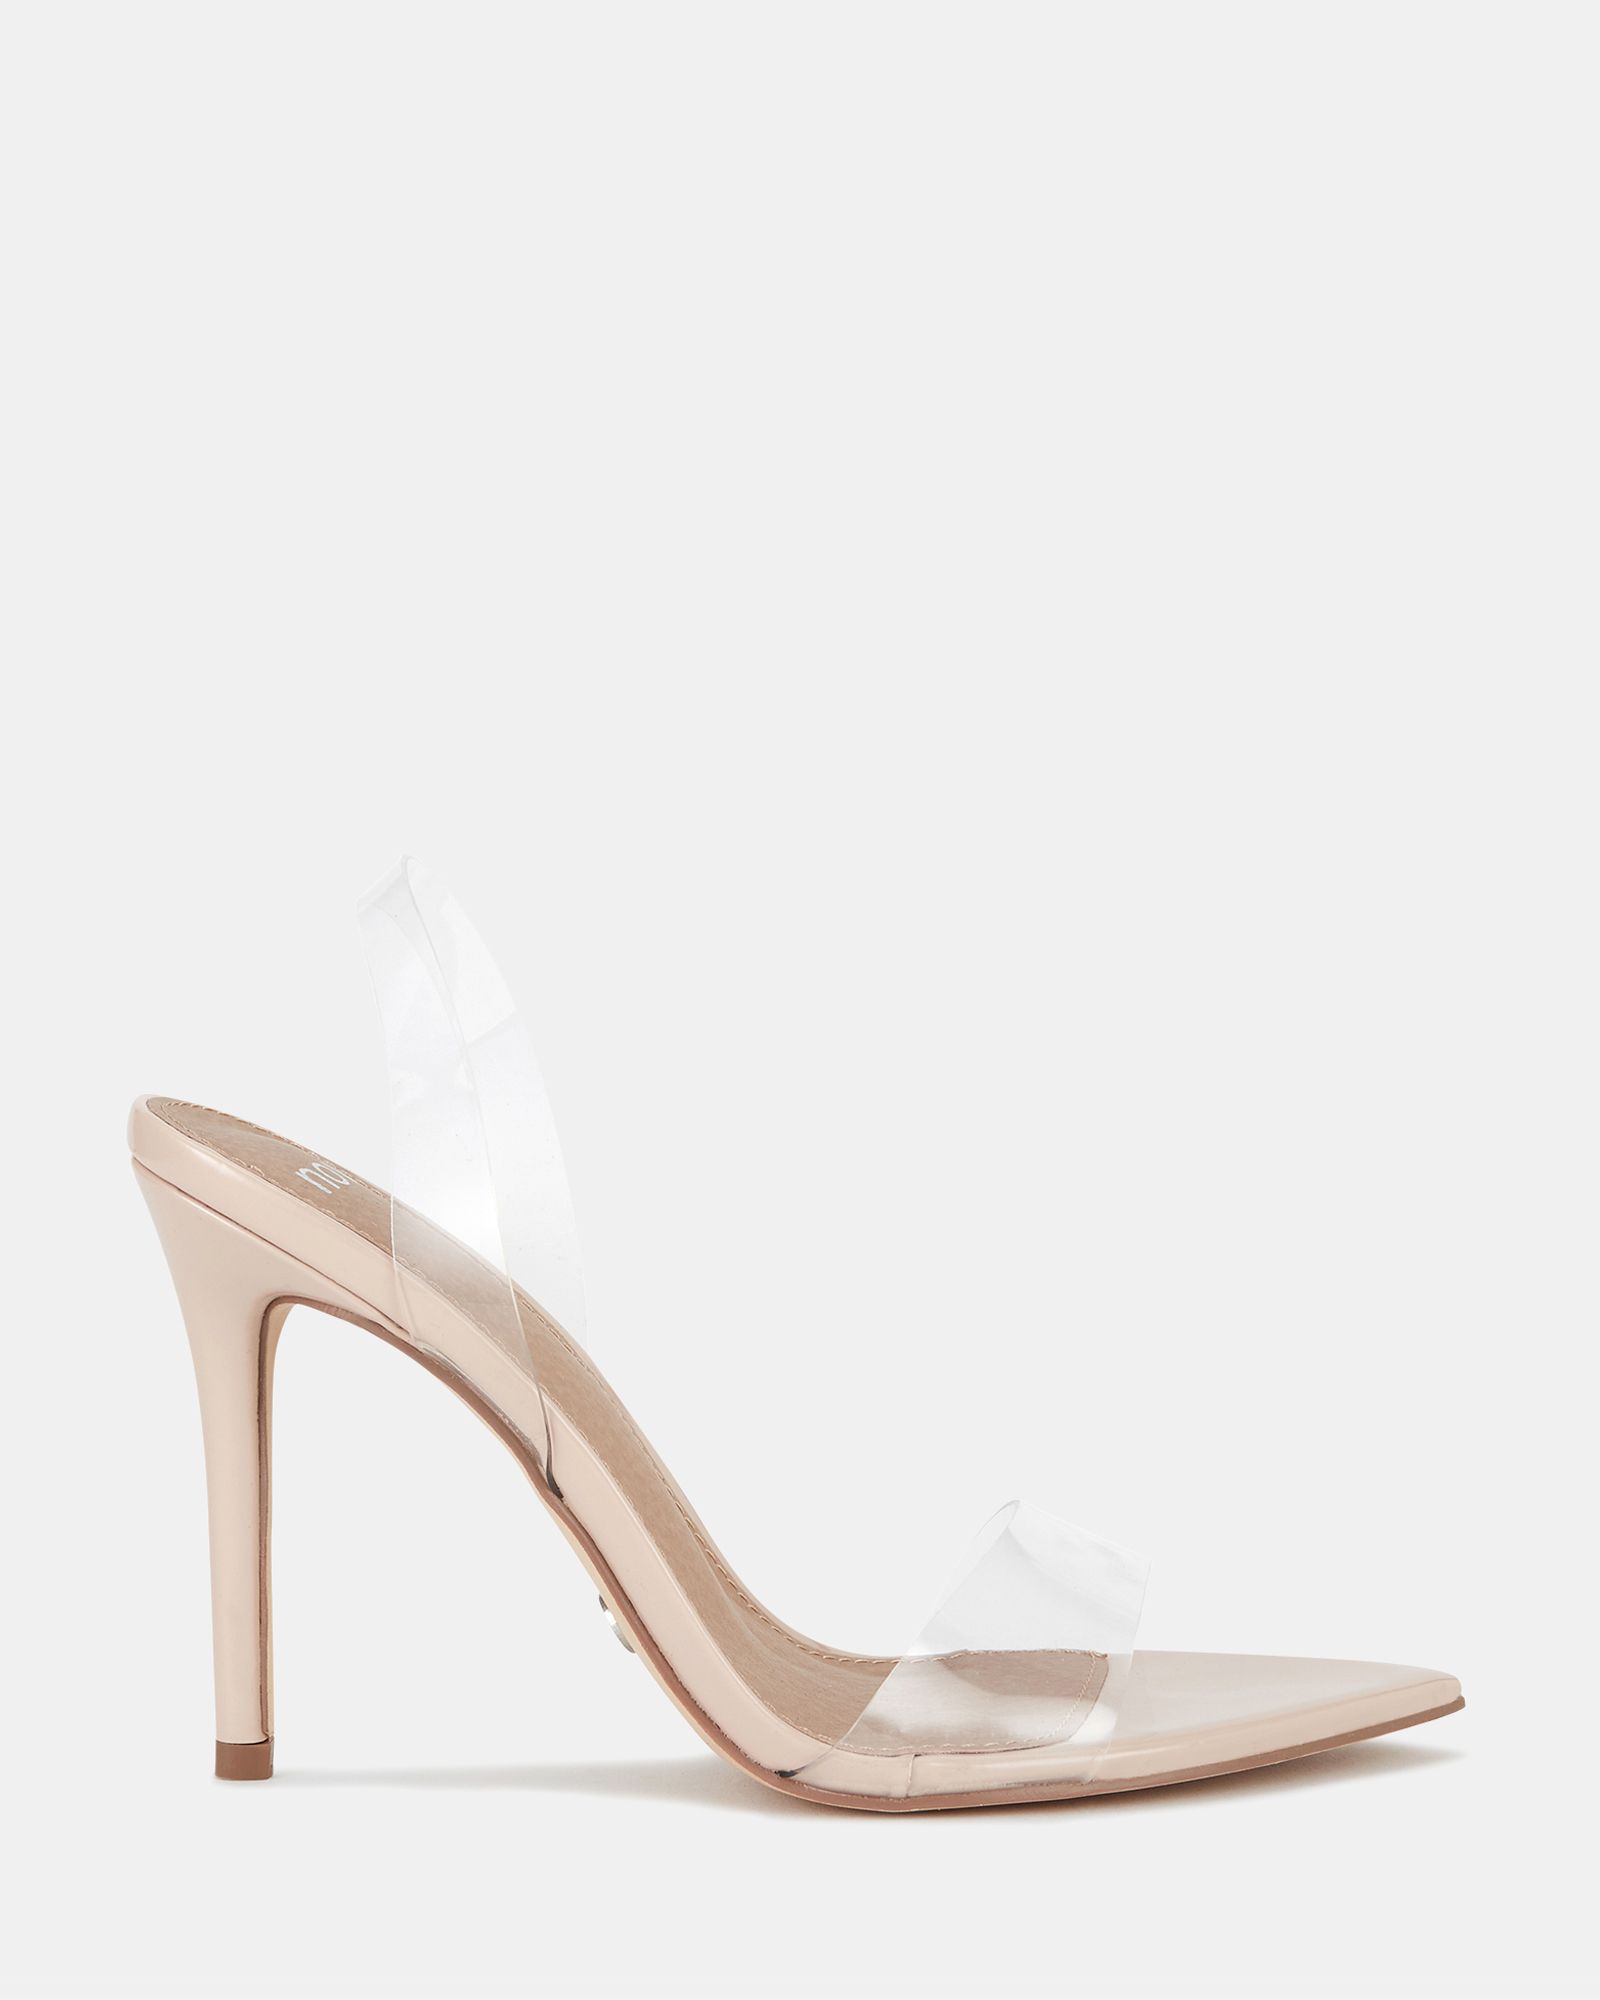 LAILEY / Nude |Buy Women's HEELS Online in Neutral | Novo Shoes | Novo Shoes